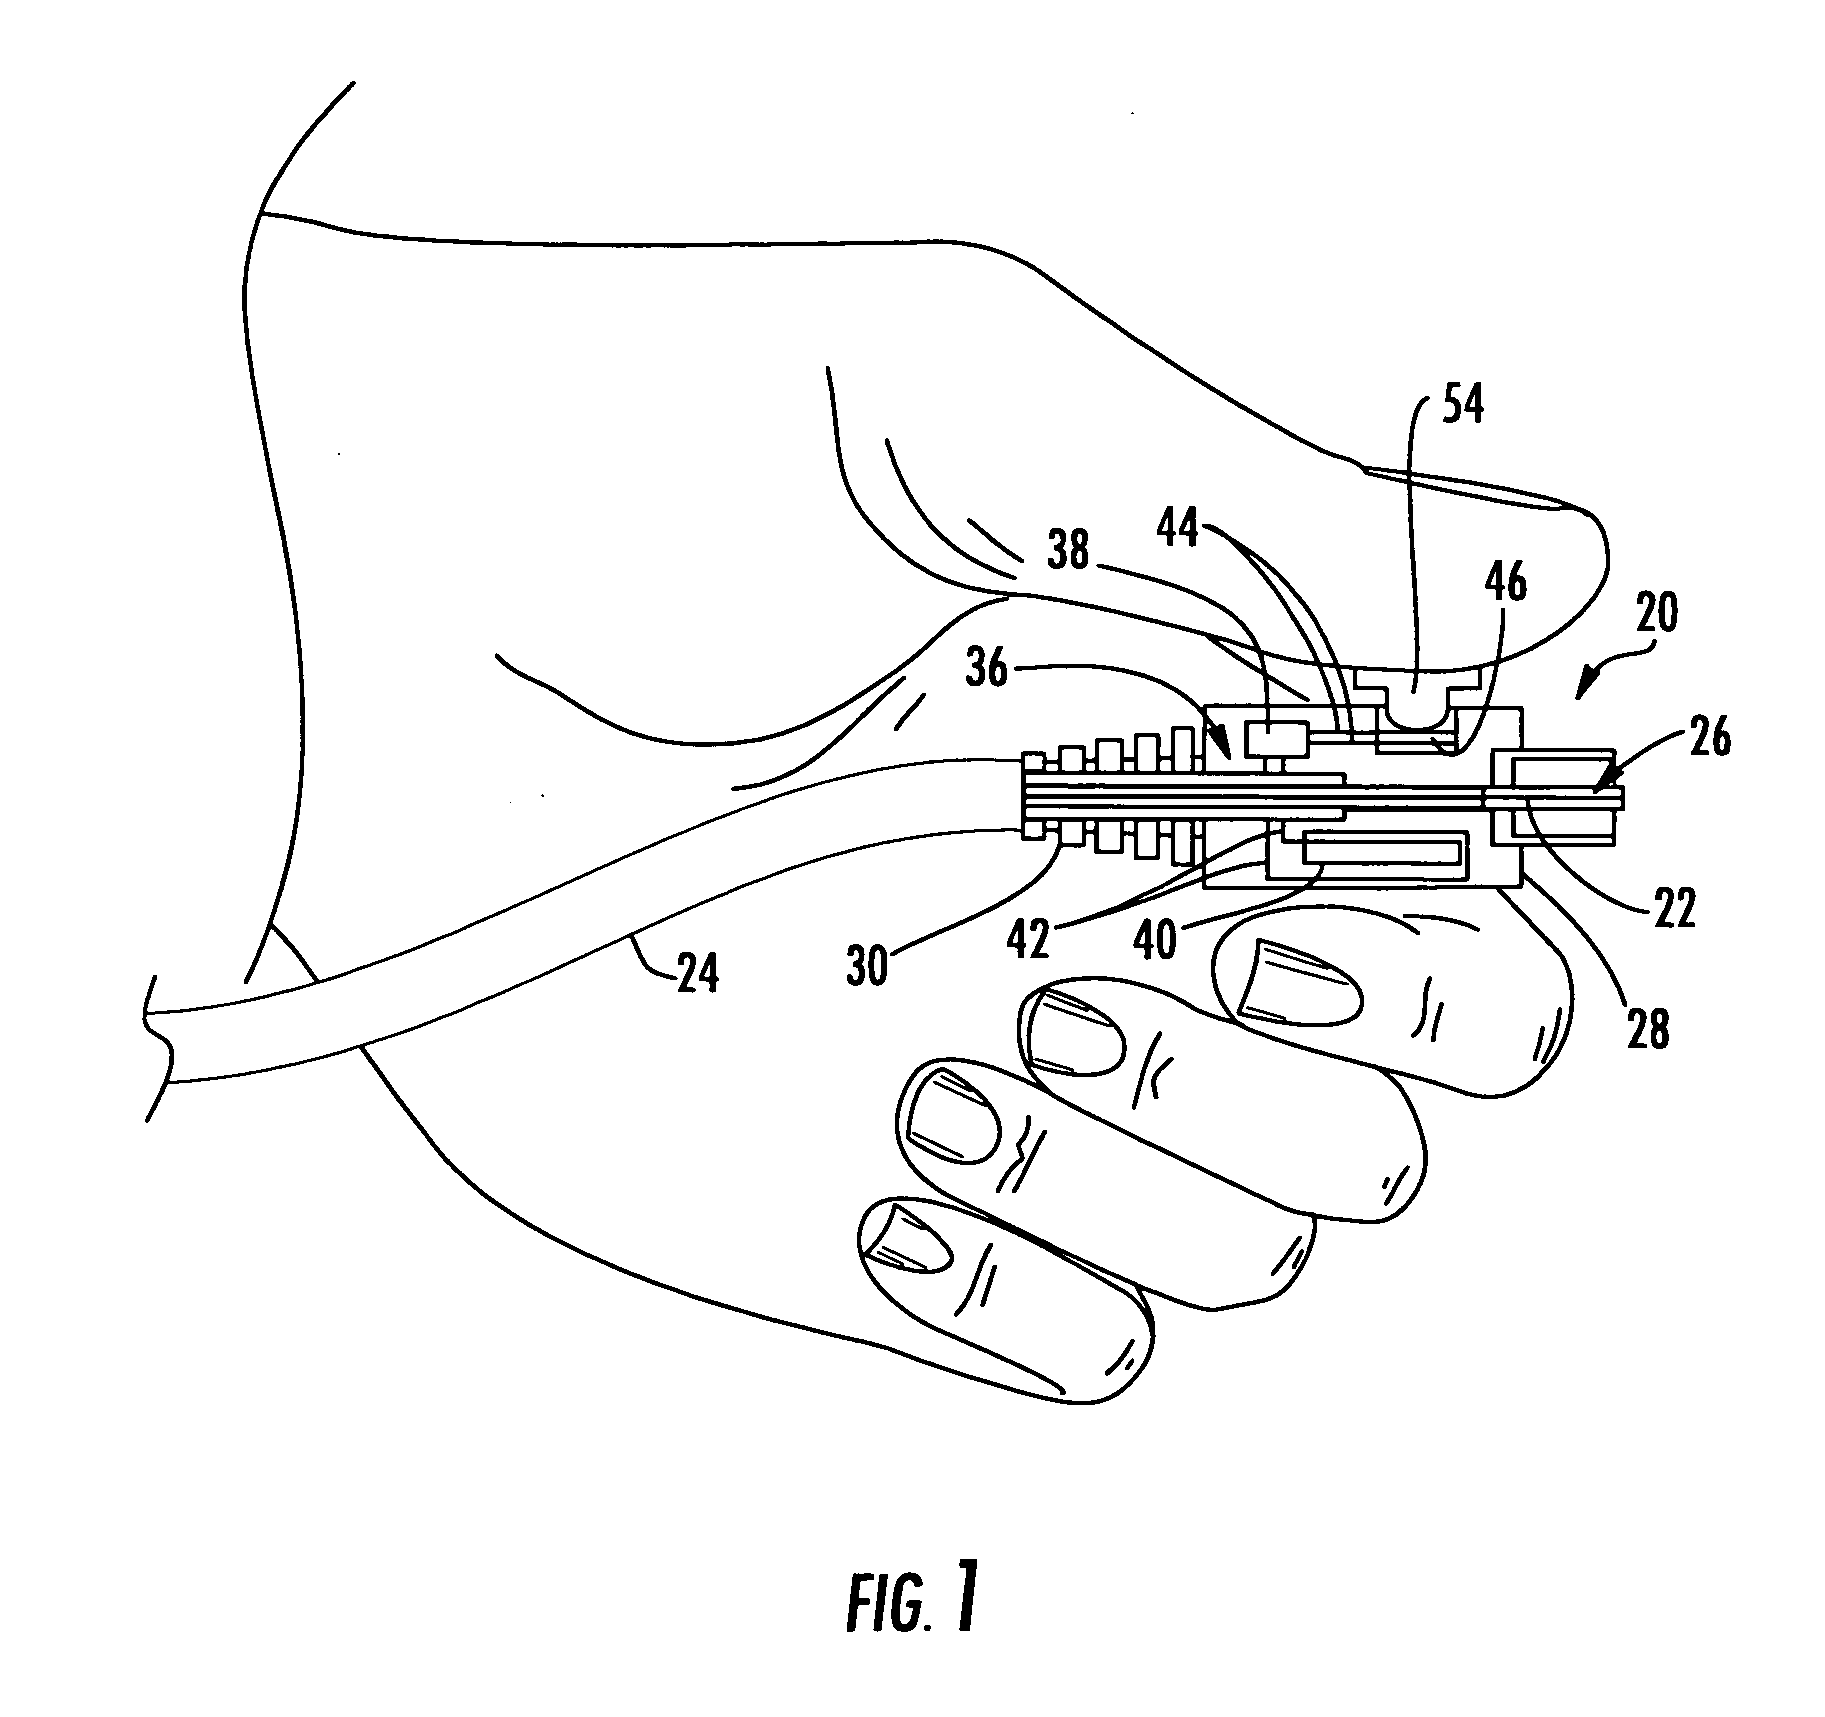 Radio frequency identification transponder for communicating condition of a component